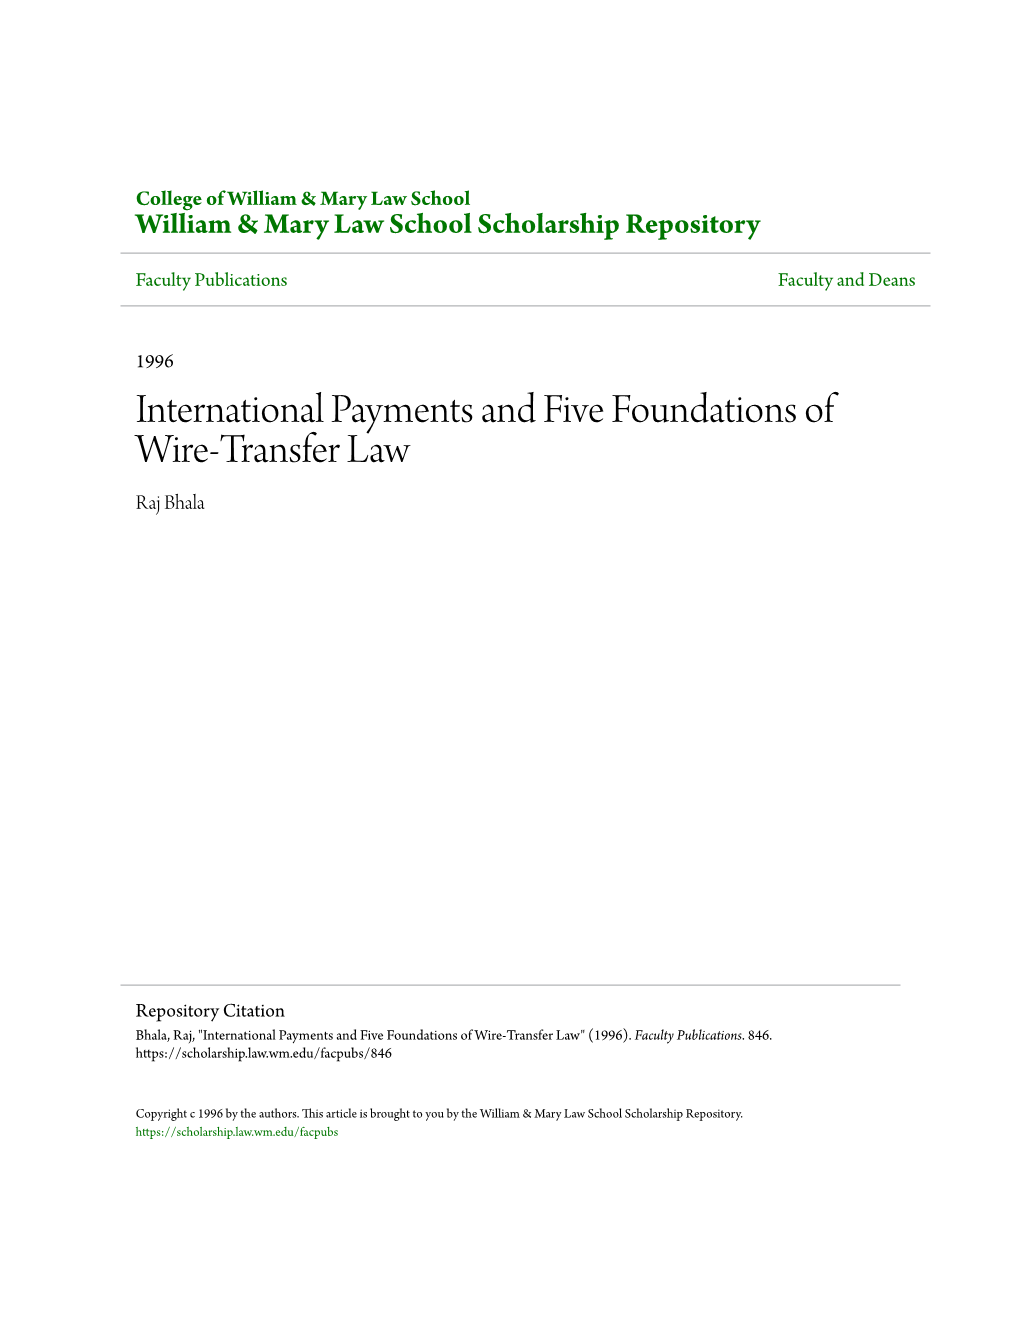 International Payments and Five Foundations of Wire-Transfer Law Raj Bhala